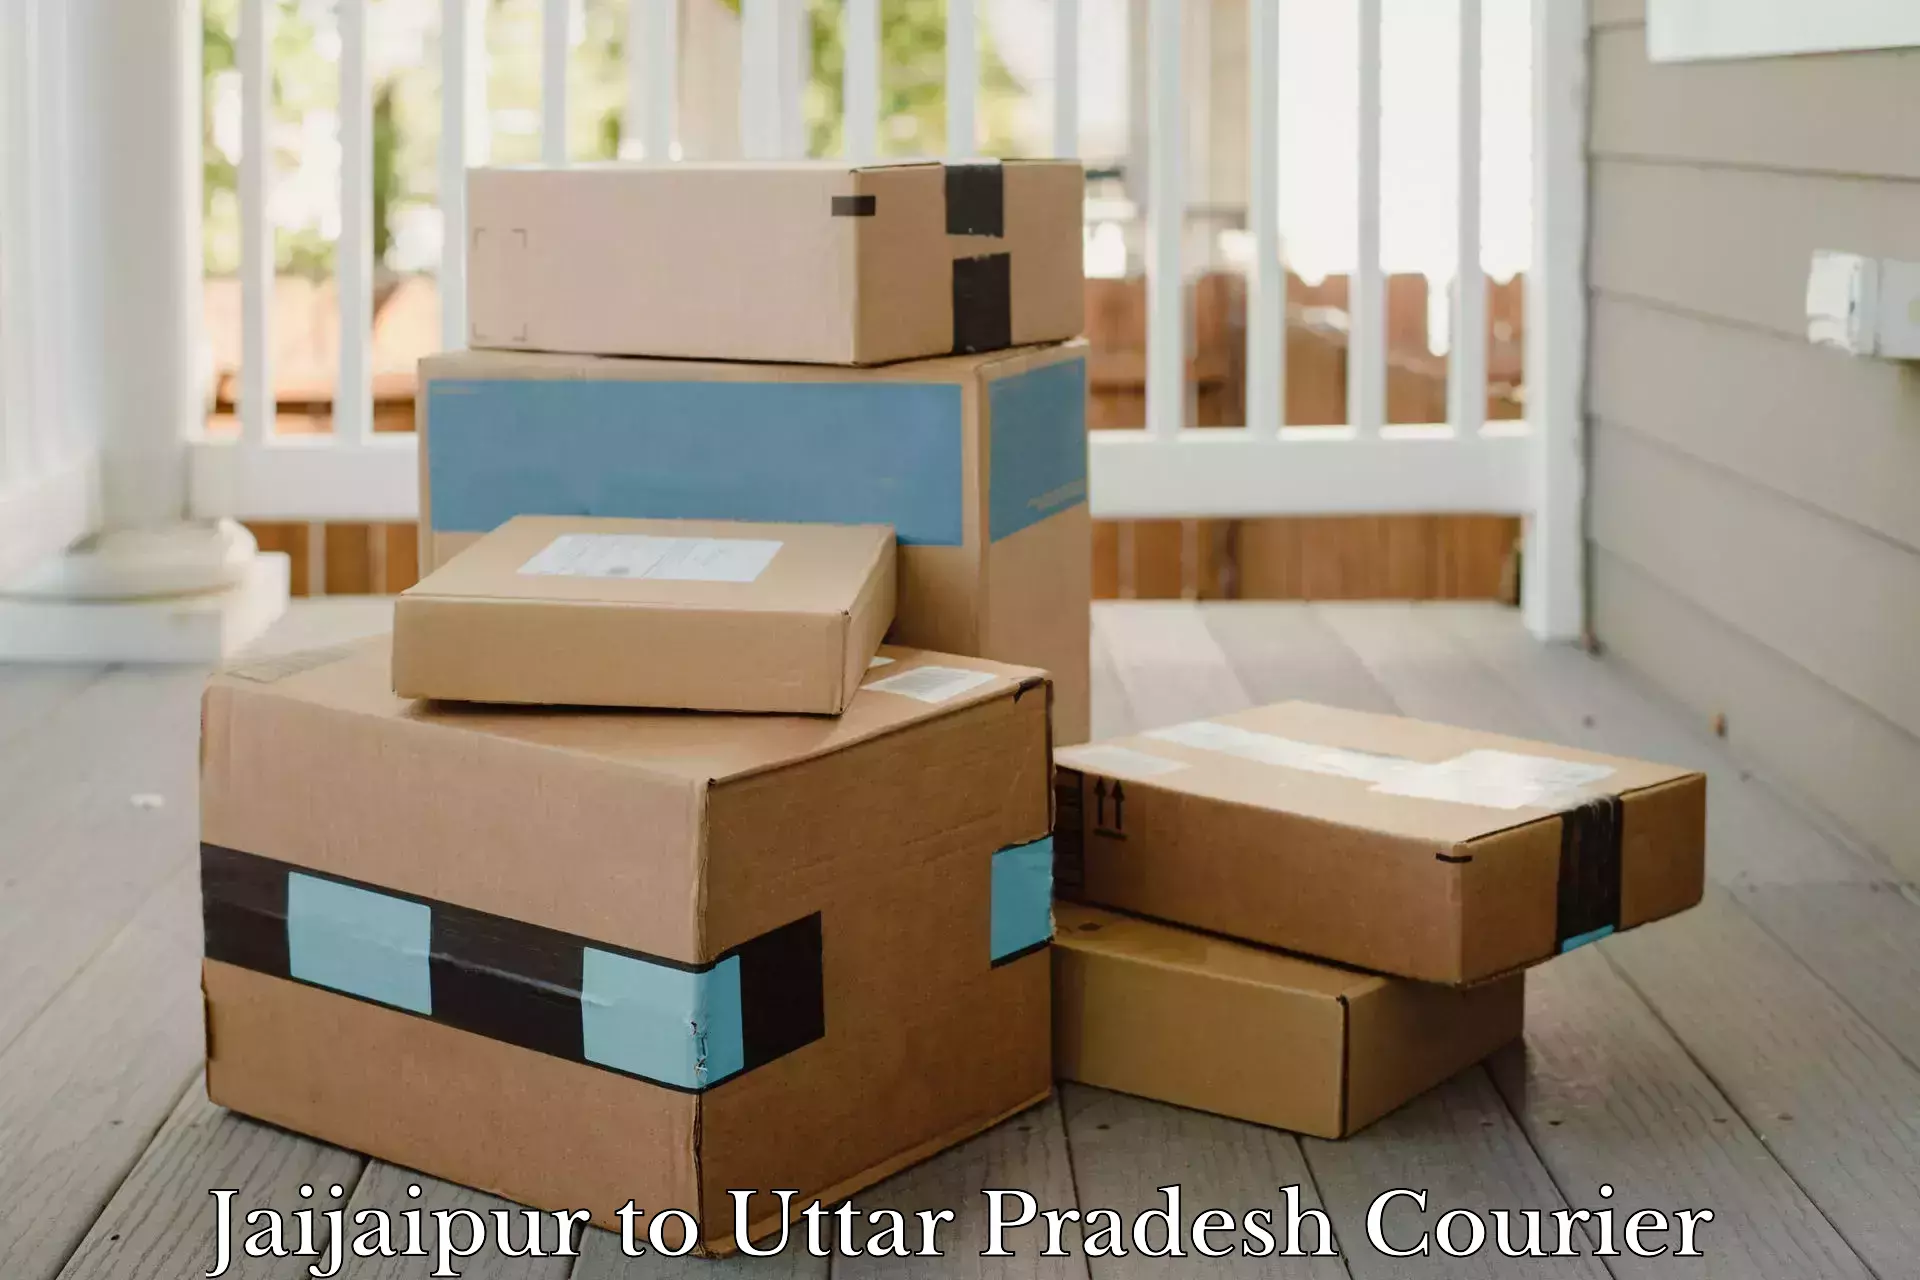 Flexible delivery schedules Jaijaipur to Ghaziabad